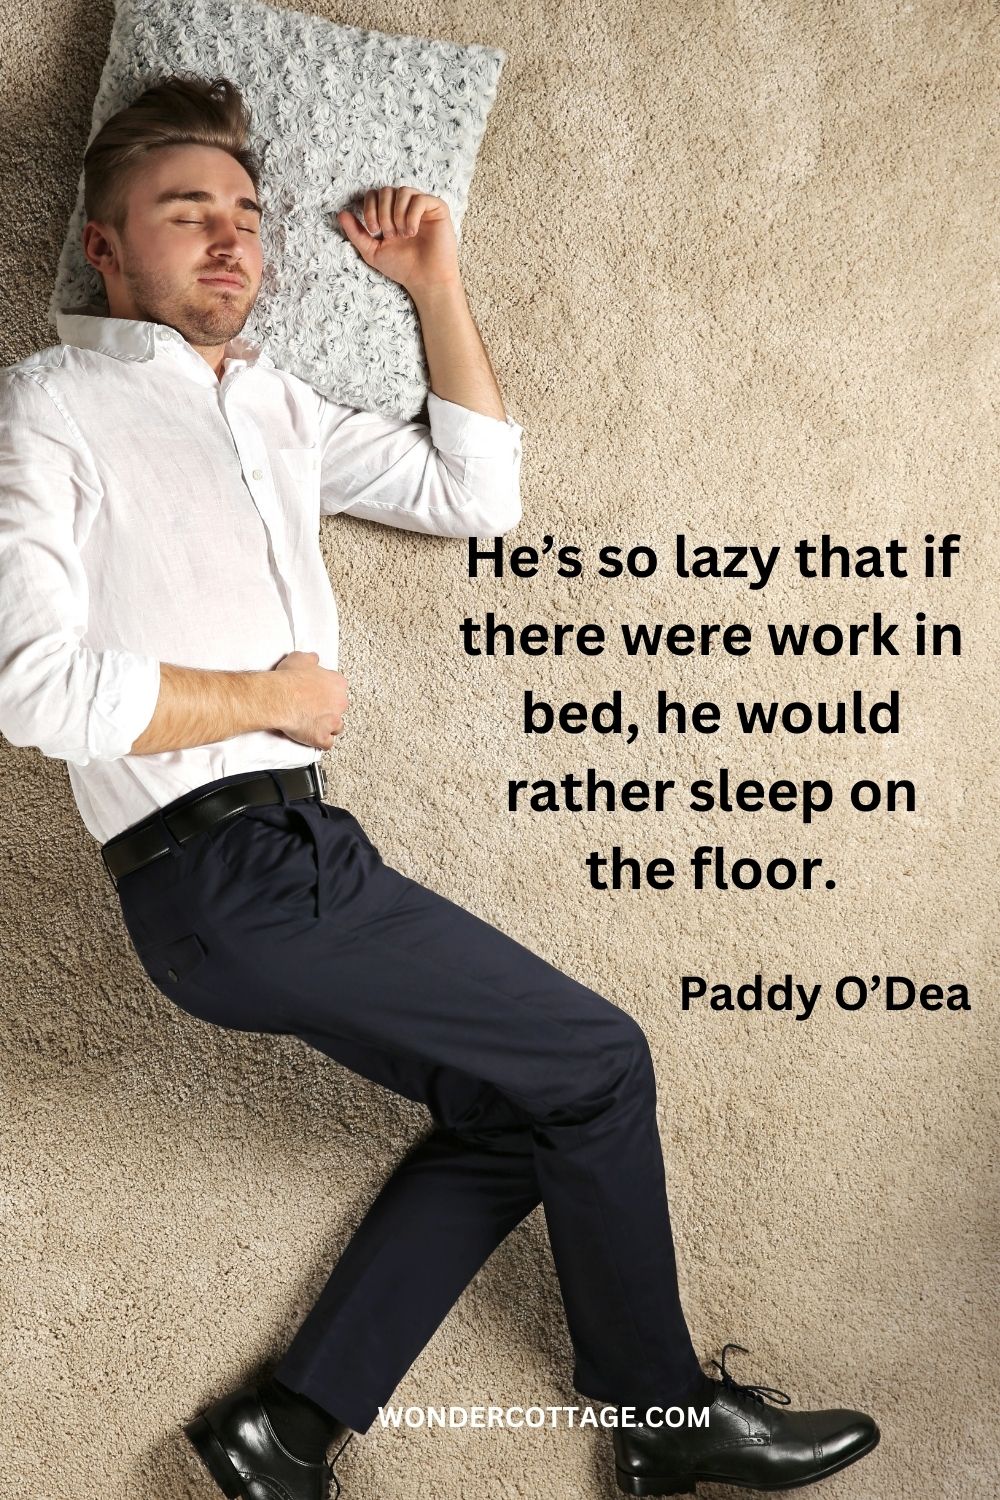 He’s so lazy that if there were work in bed, he would rather sleep on the floor. Paddy O’Dea